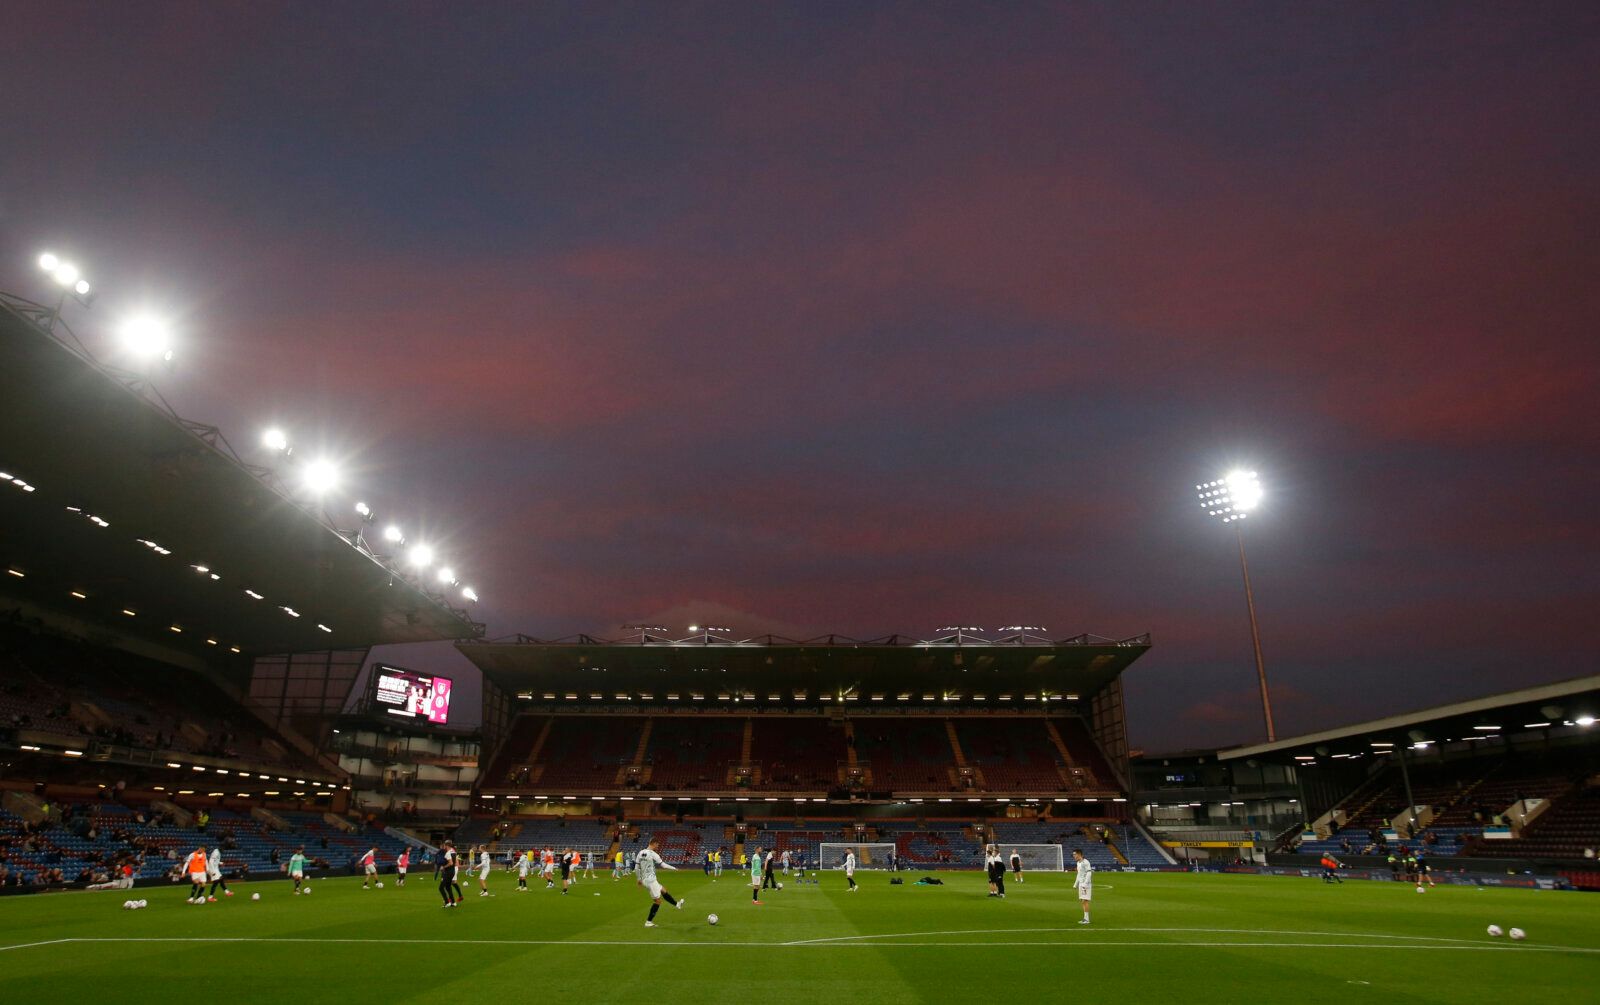 Soccer Football - Carabao Cup - Third Round - Burnley v Rochdale - Turf Moor, Burnley, Britain - September 21, 2021  General view inside the stadium before the match Action Images via Reuters/Ed Sykes EDITORIAL USE ONLY. No use with unauthorized audio, video, data, fixture lists, club/league logos or 'live' services. Online in-match use limited to 75 images, no video emulation. No use in betting, games or single club /league/player publications.  Please contact your account representative for fu